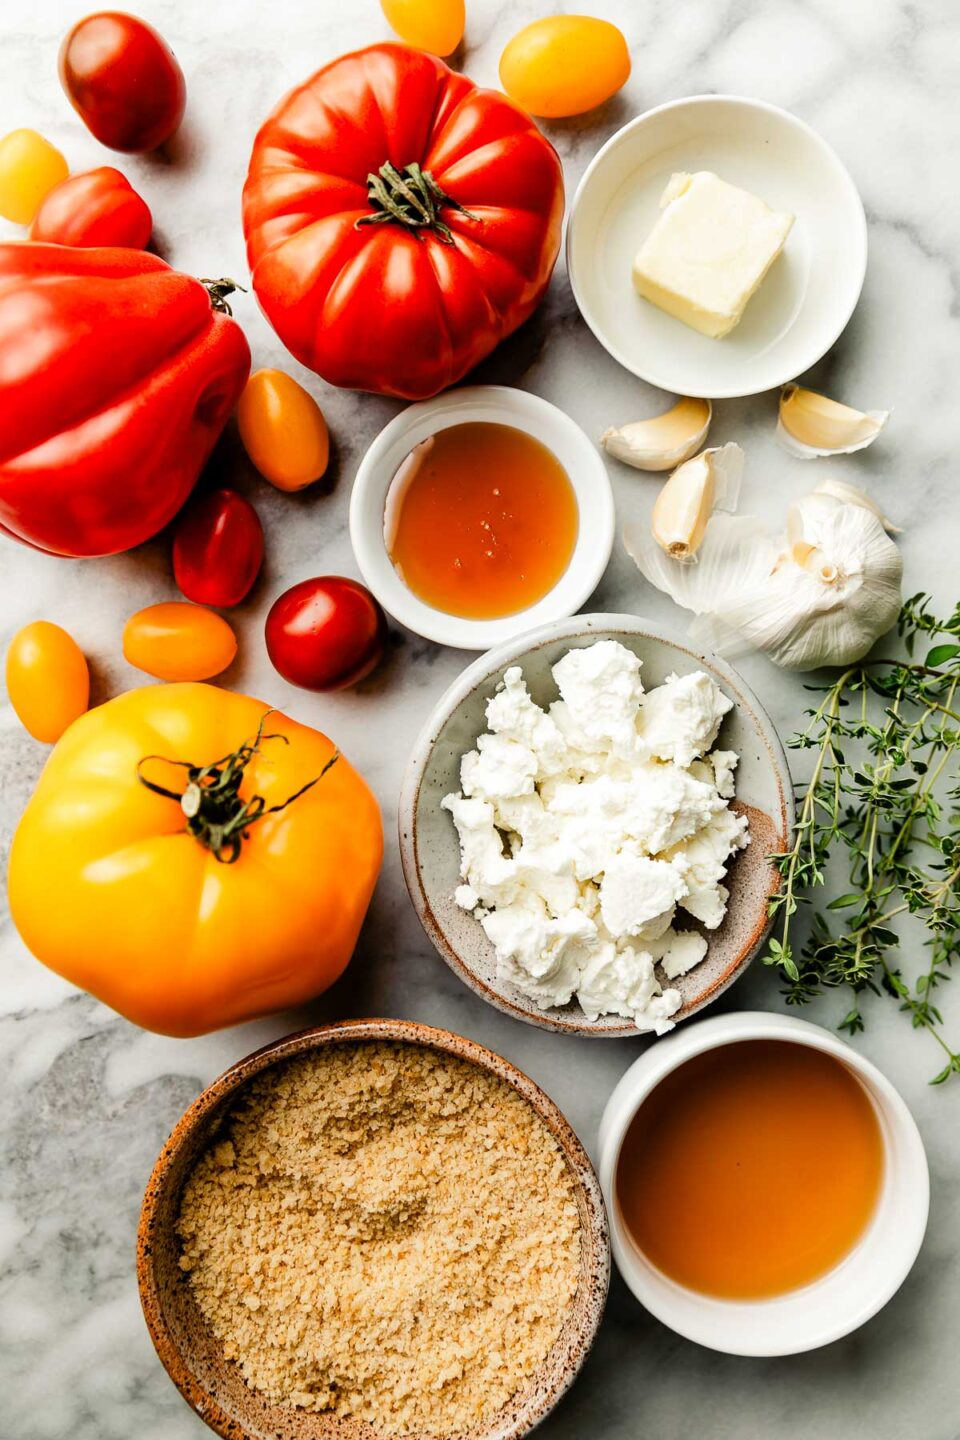 Ingredients displayed on a white and grey marbled surface: bowls of crumbled goat cheese, honey, butter, white balsamic vinegar, salt, thyme sprigs and heirloom and cherry tomatoes.